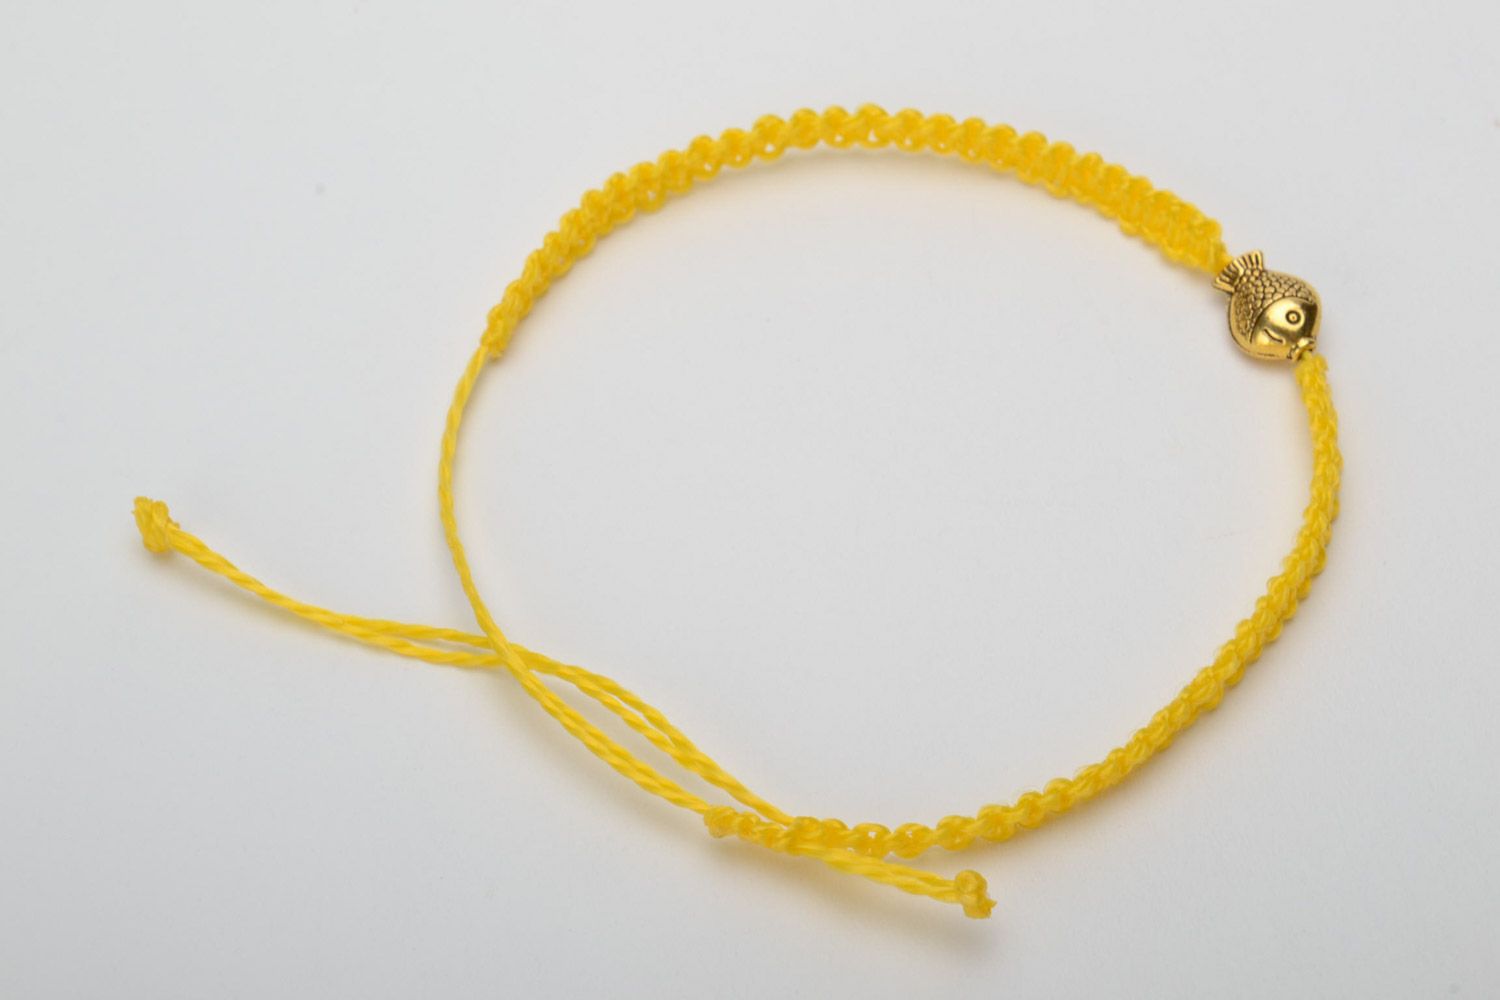 Handmade women's designer macrame woven bracelet of yellow color with metal charm in the shape of fish photo 4